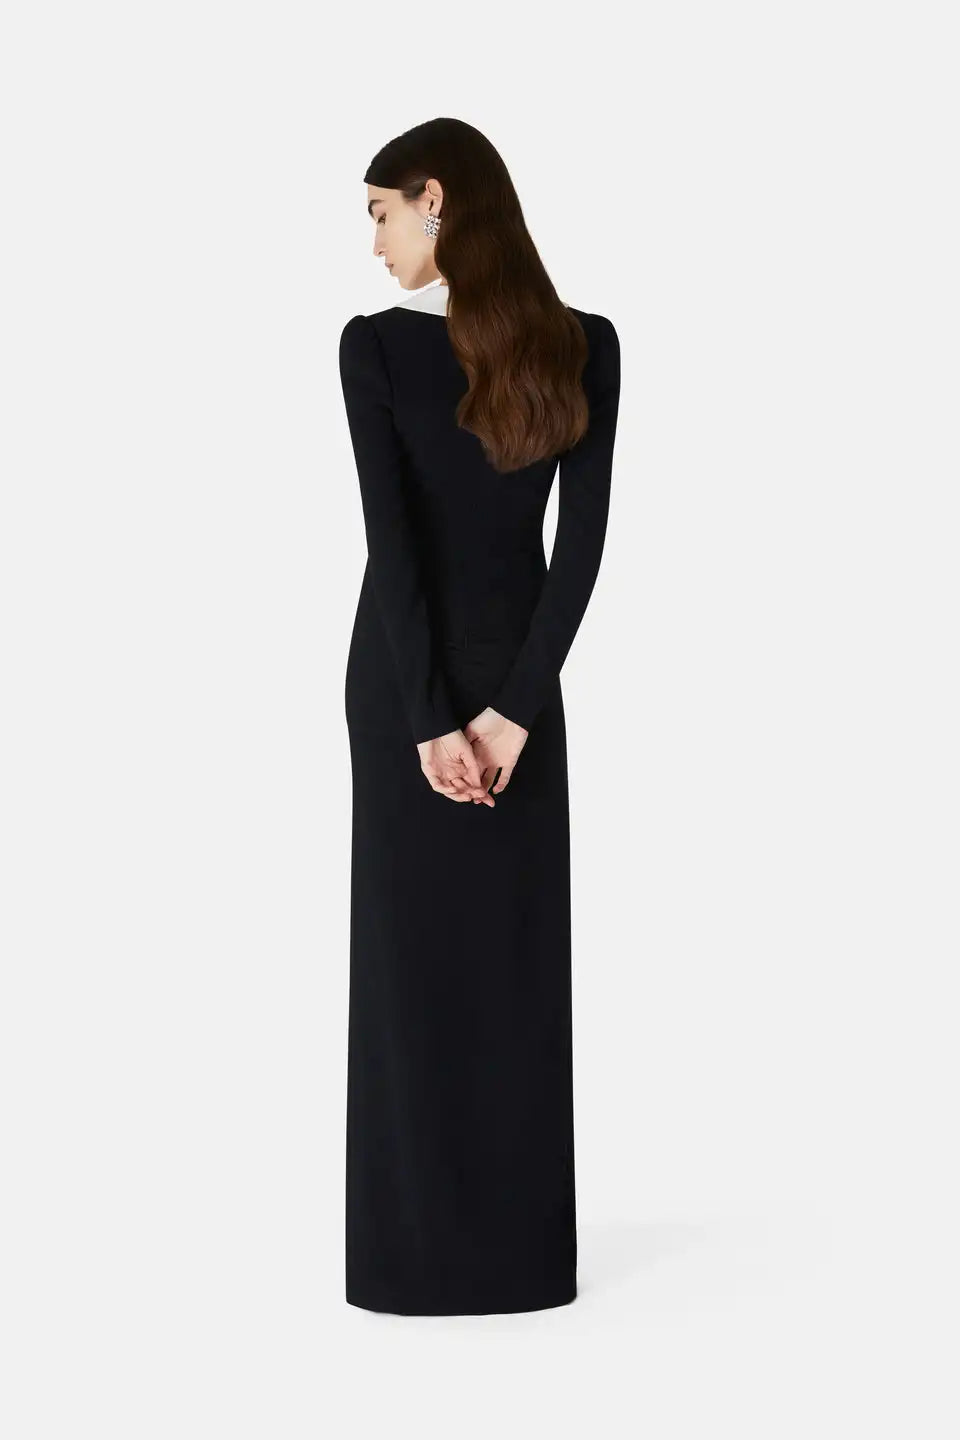 This Alessandra Rich maxi dress is crafted from stretchy viscose for a fluid feel and a fitted A-line silhouette. With a deep V-neckline, contrasting collar, and post-stud cuffs, it features a concealed zipper at the back. Adorned with tone-on-tone silk organza floral embellishments and broken details on the bodice, elevate your style with this elegant piece.